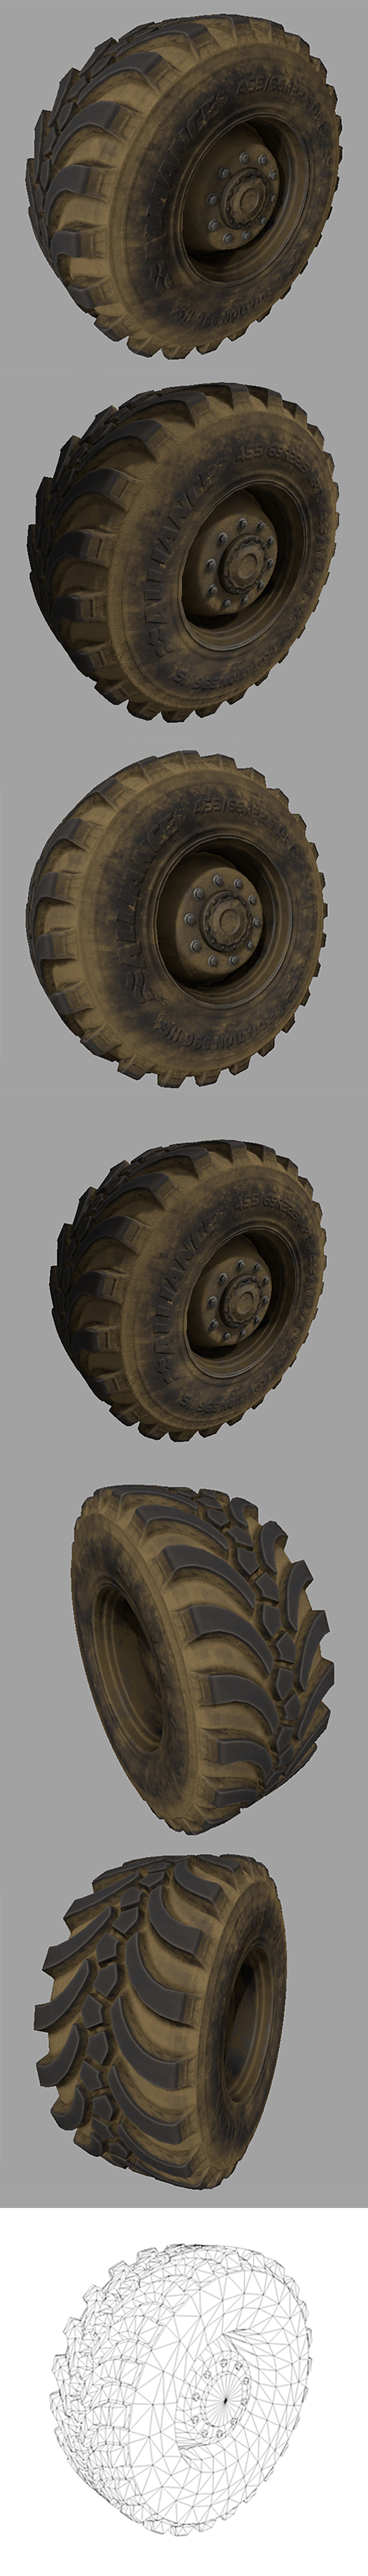 Wheel-tire with Full - 3Docean 21436662